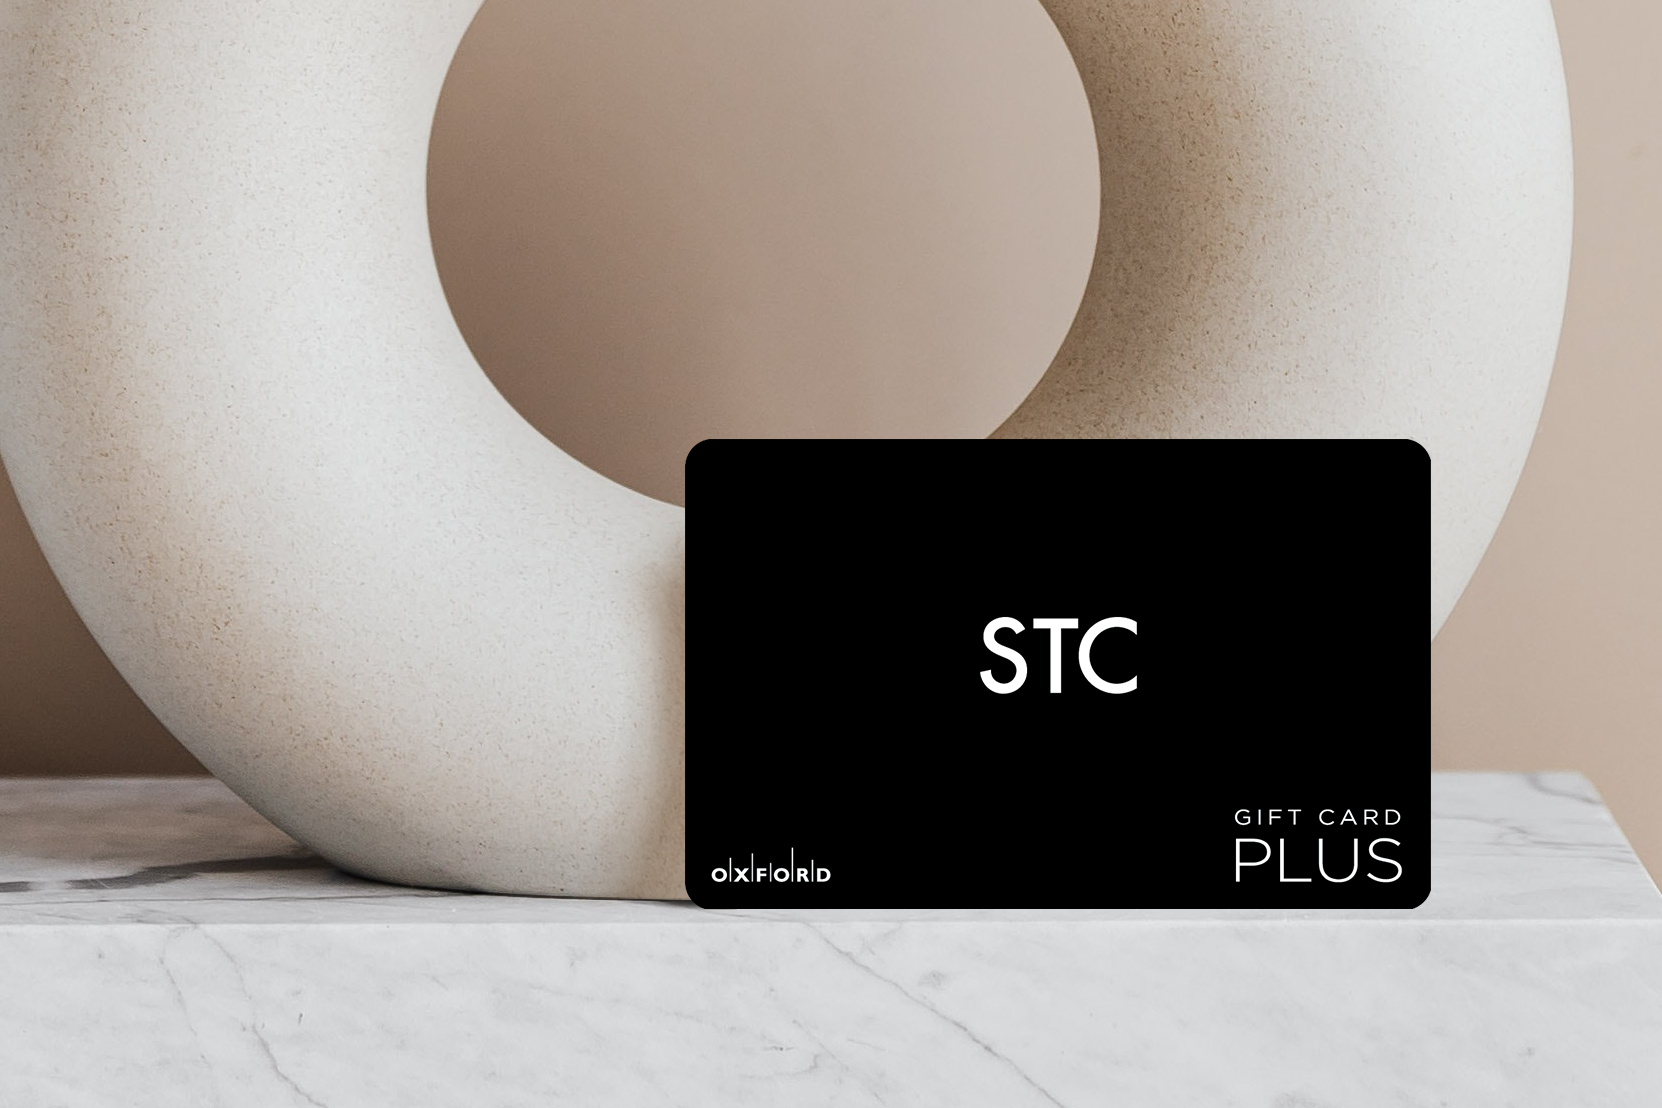 promotional image of a black STC gift card in front of a white ceramic circular vase